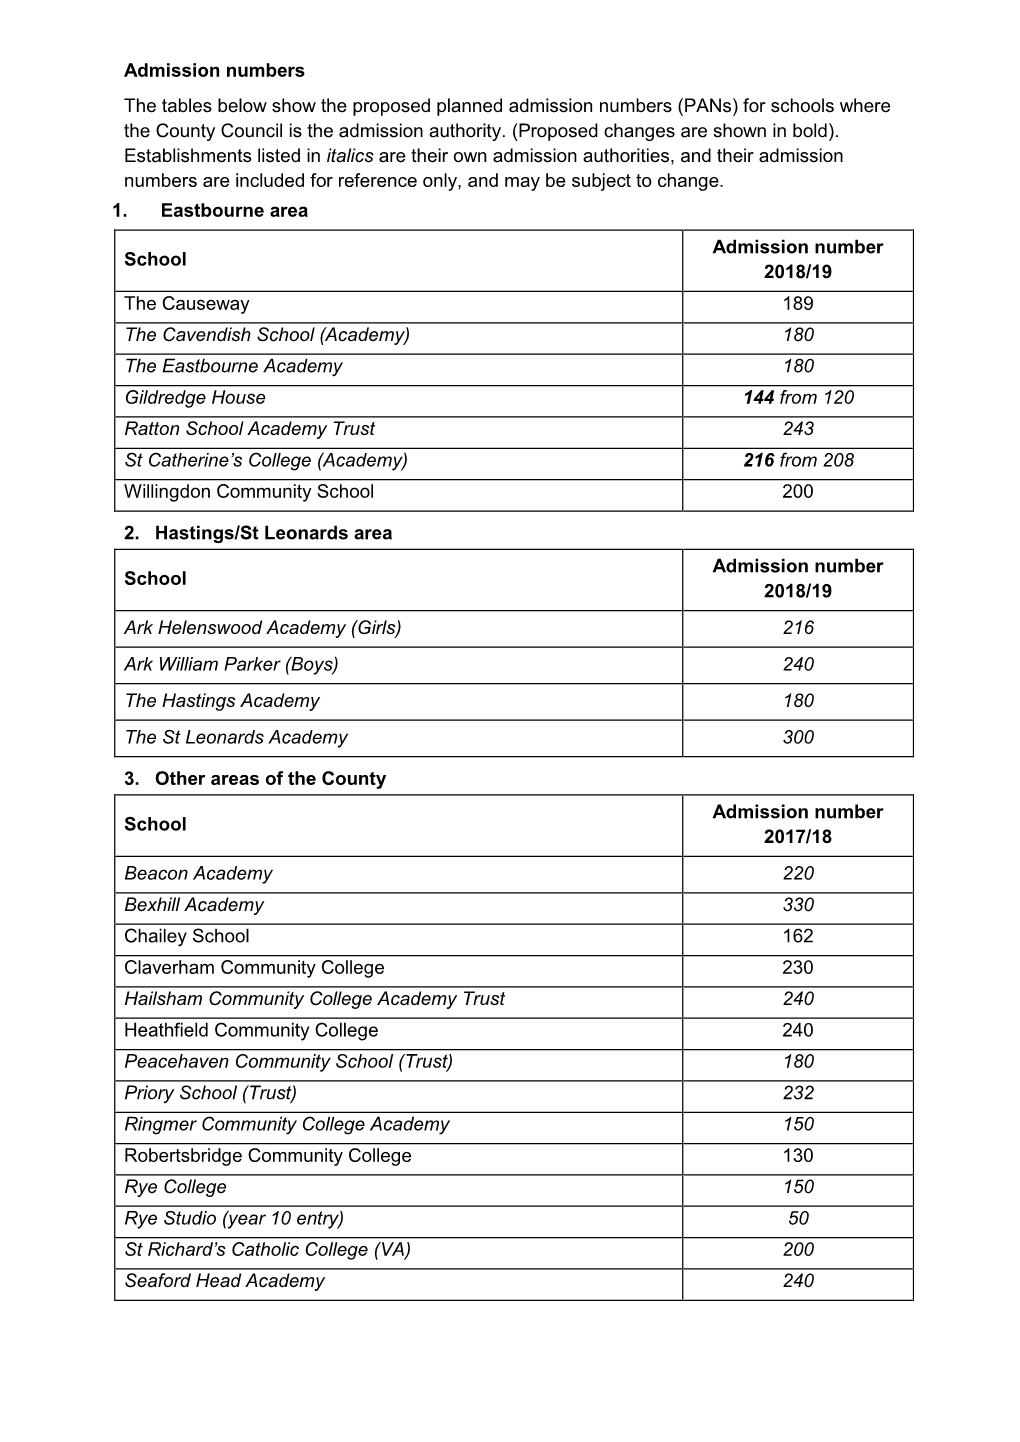 Admission Numbers the Tables Below Show the Proposed Planned Admission Numbers (Pans) for Schools Where the County Council Is the Admission Authority